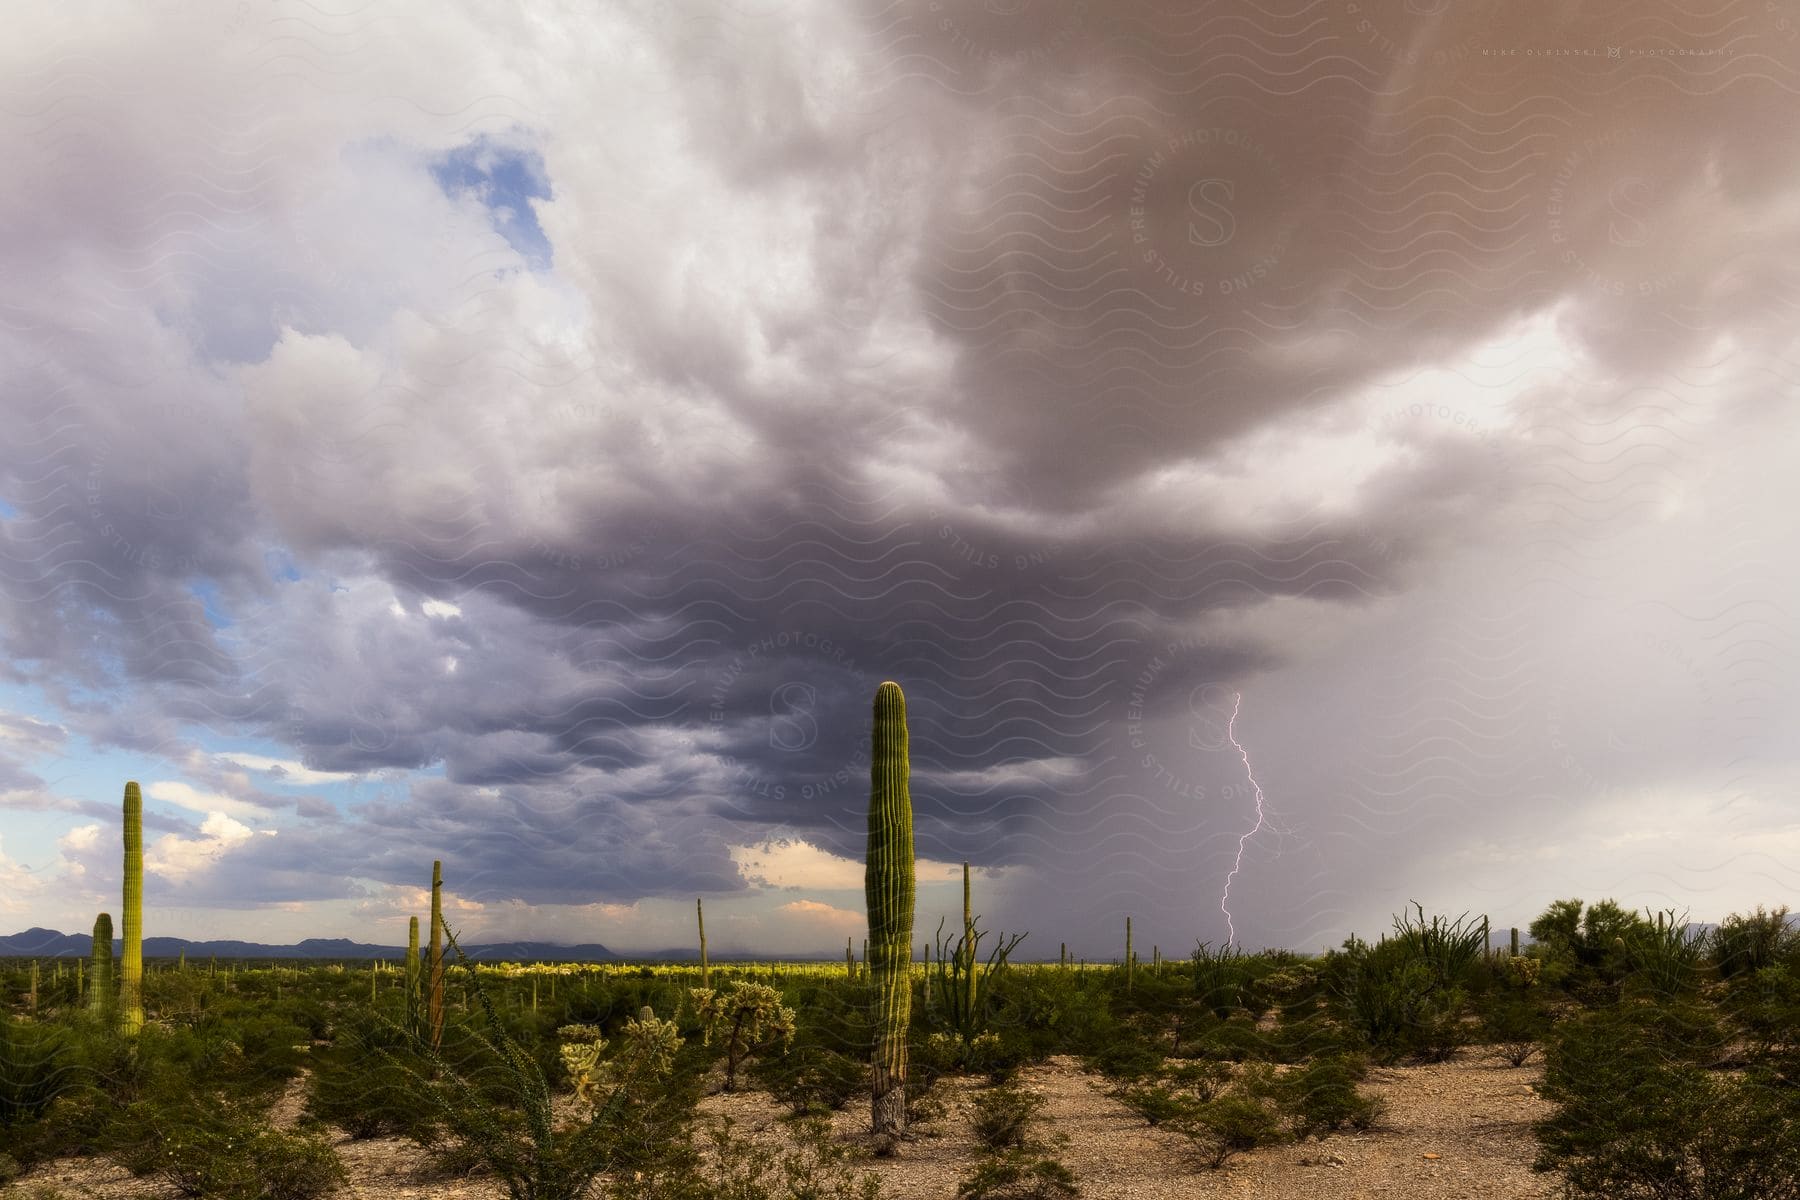 Stock photo of the desert landscape with cacti and storm clouds in the sky